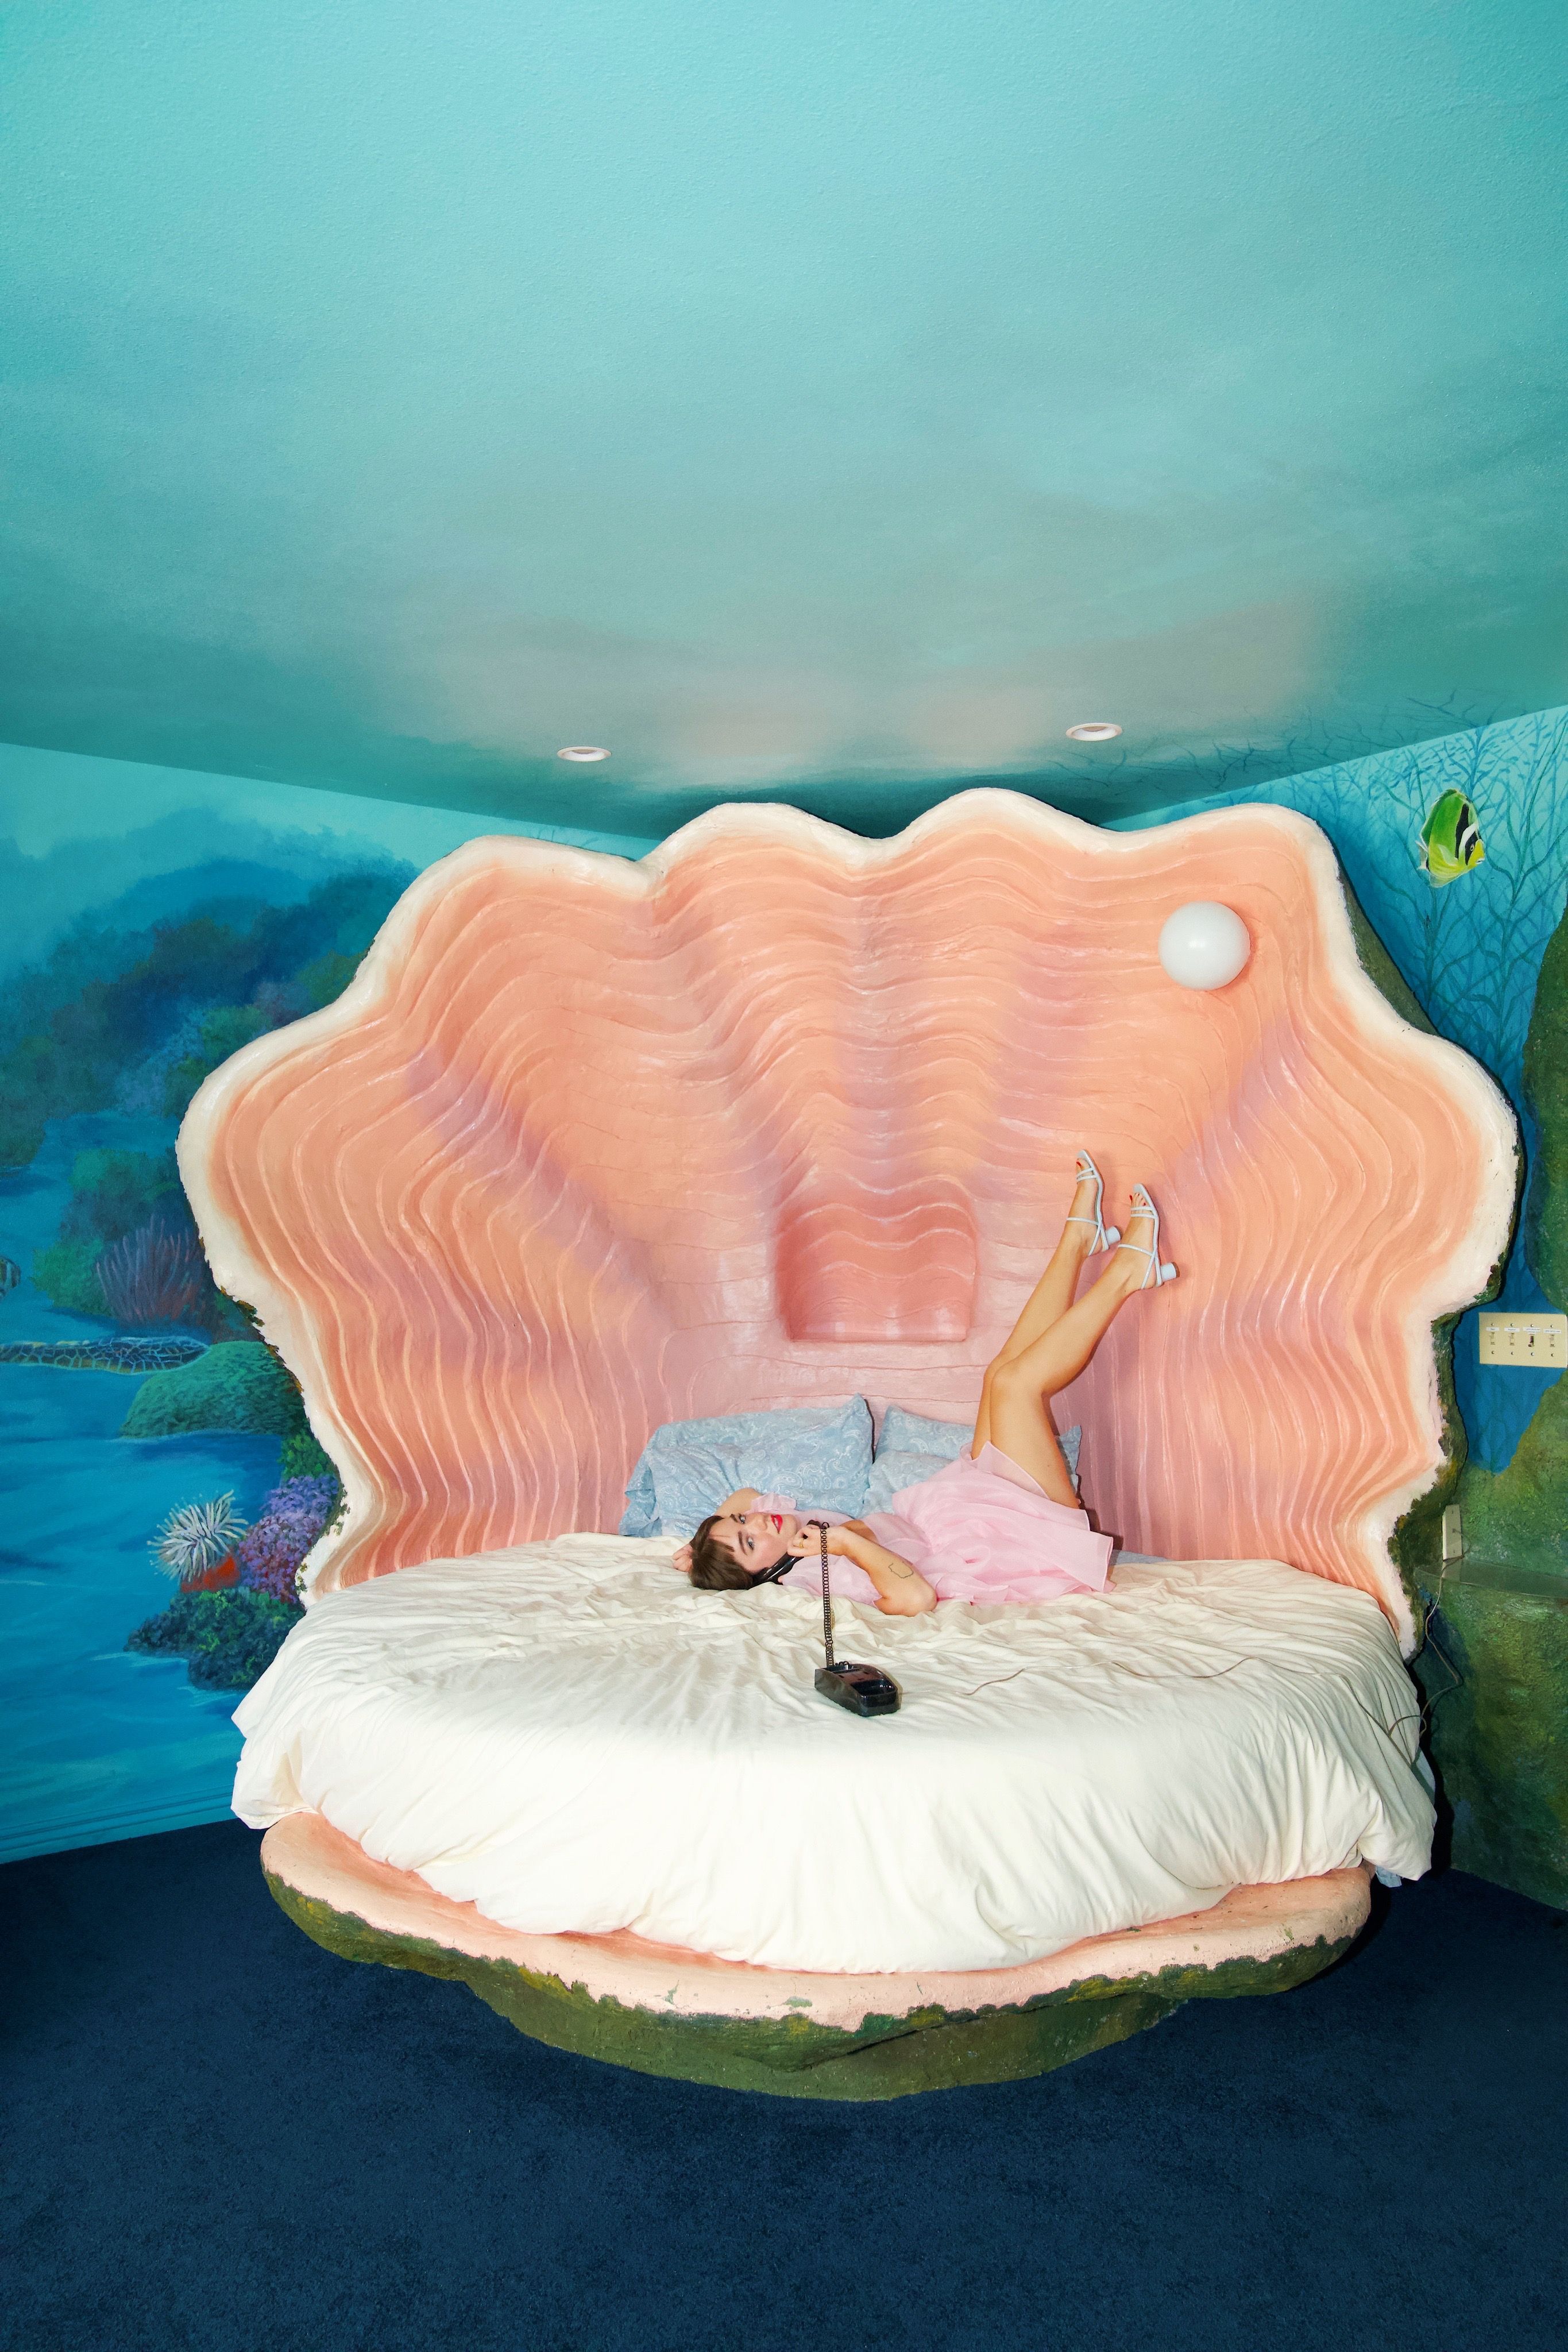 The Couple Making Themed Budget Hotels a Dreamy Instagram Aesthetic